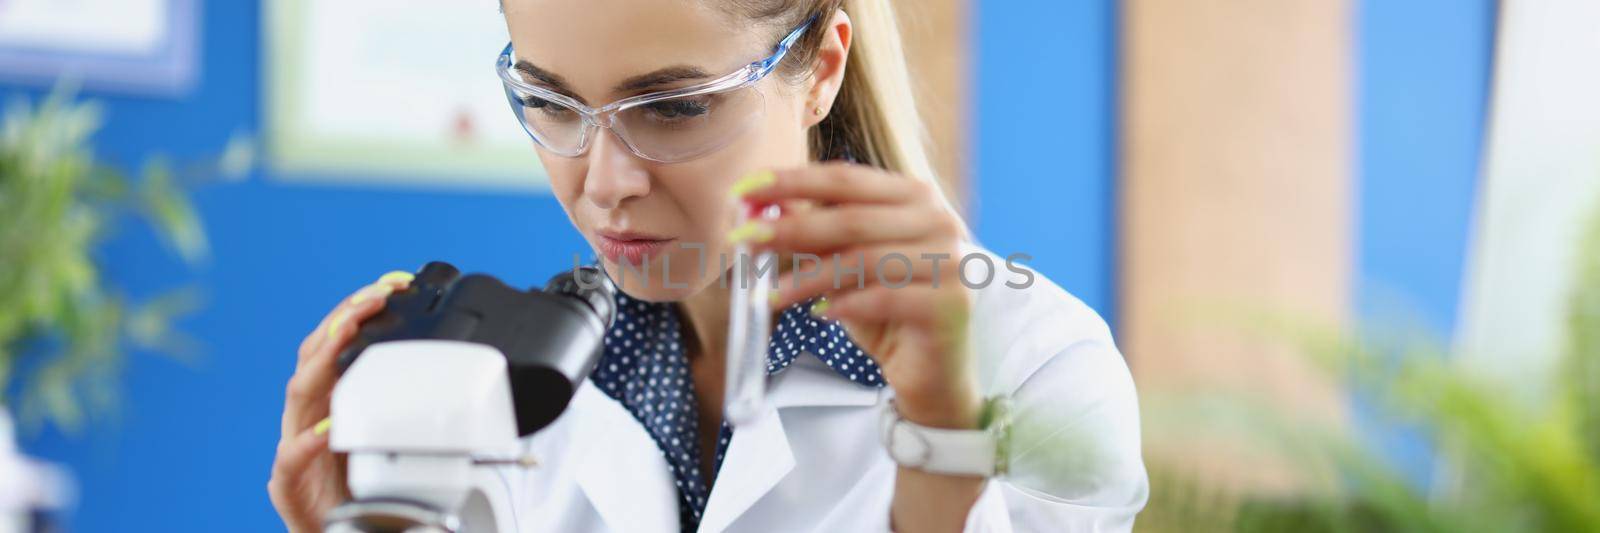 Woman scientist chemist looking through microscope and holding test tube by kuprevich